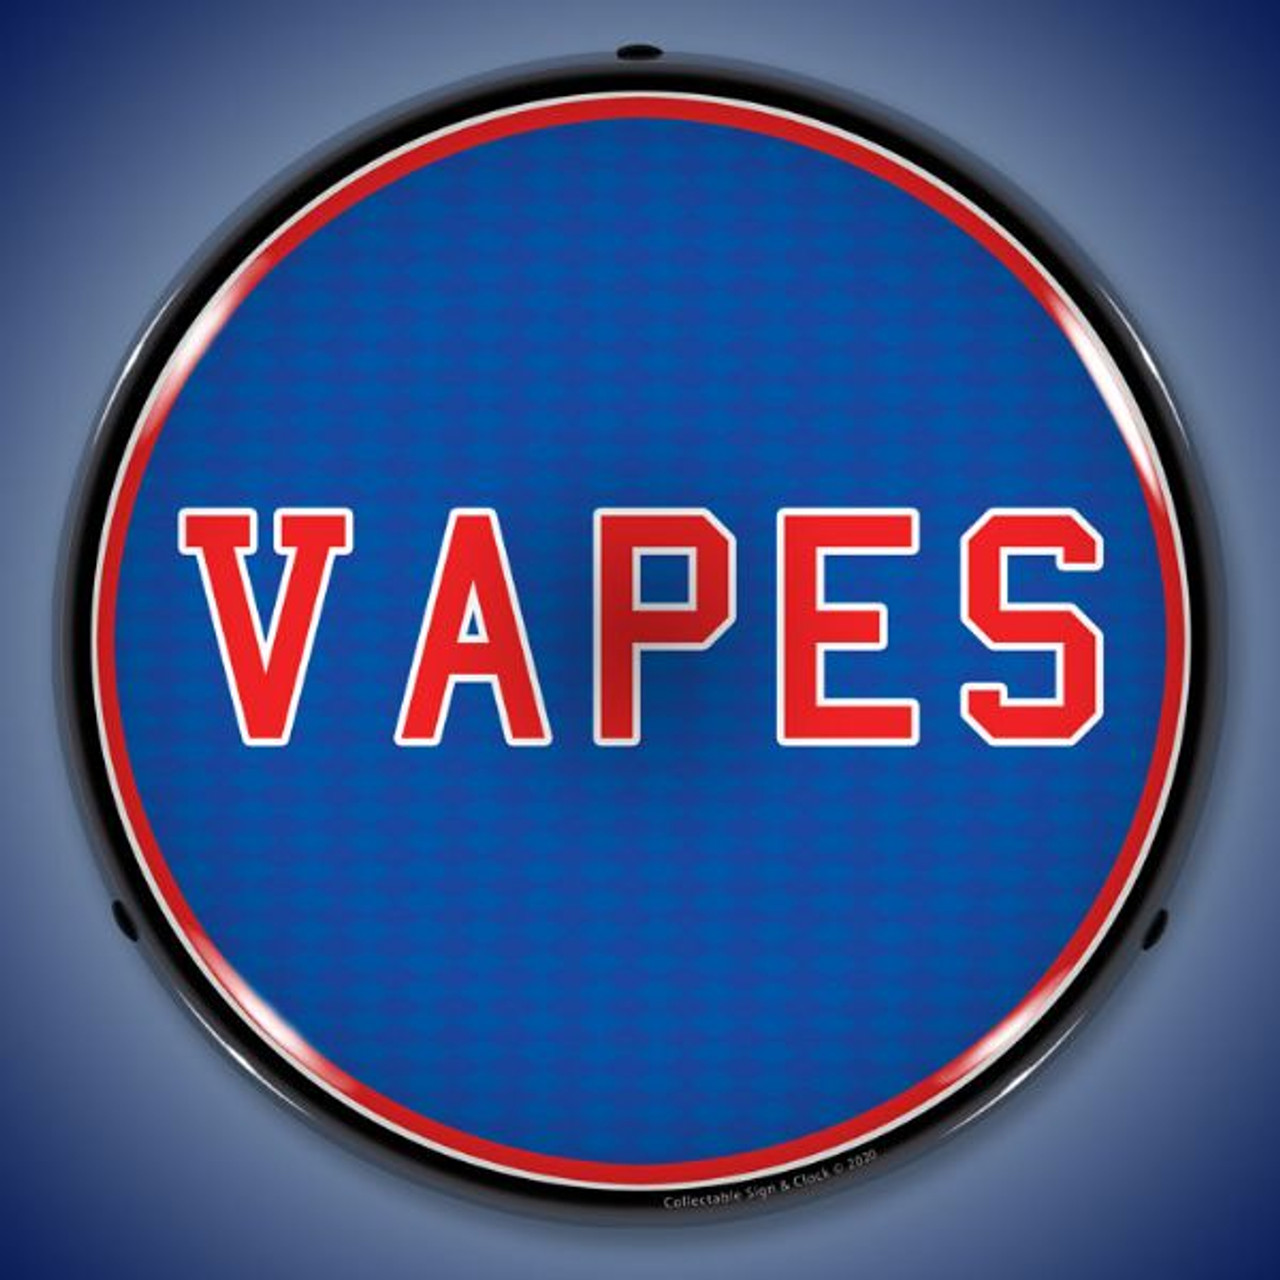 VAPES  LED Lighted Business Sign 14 x 14 Inches